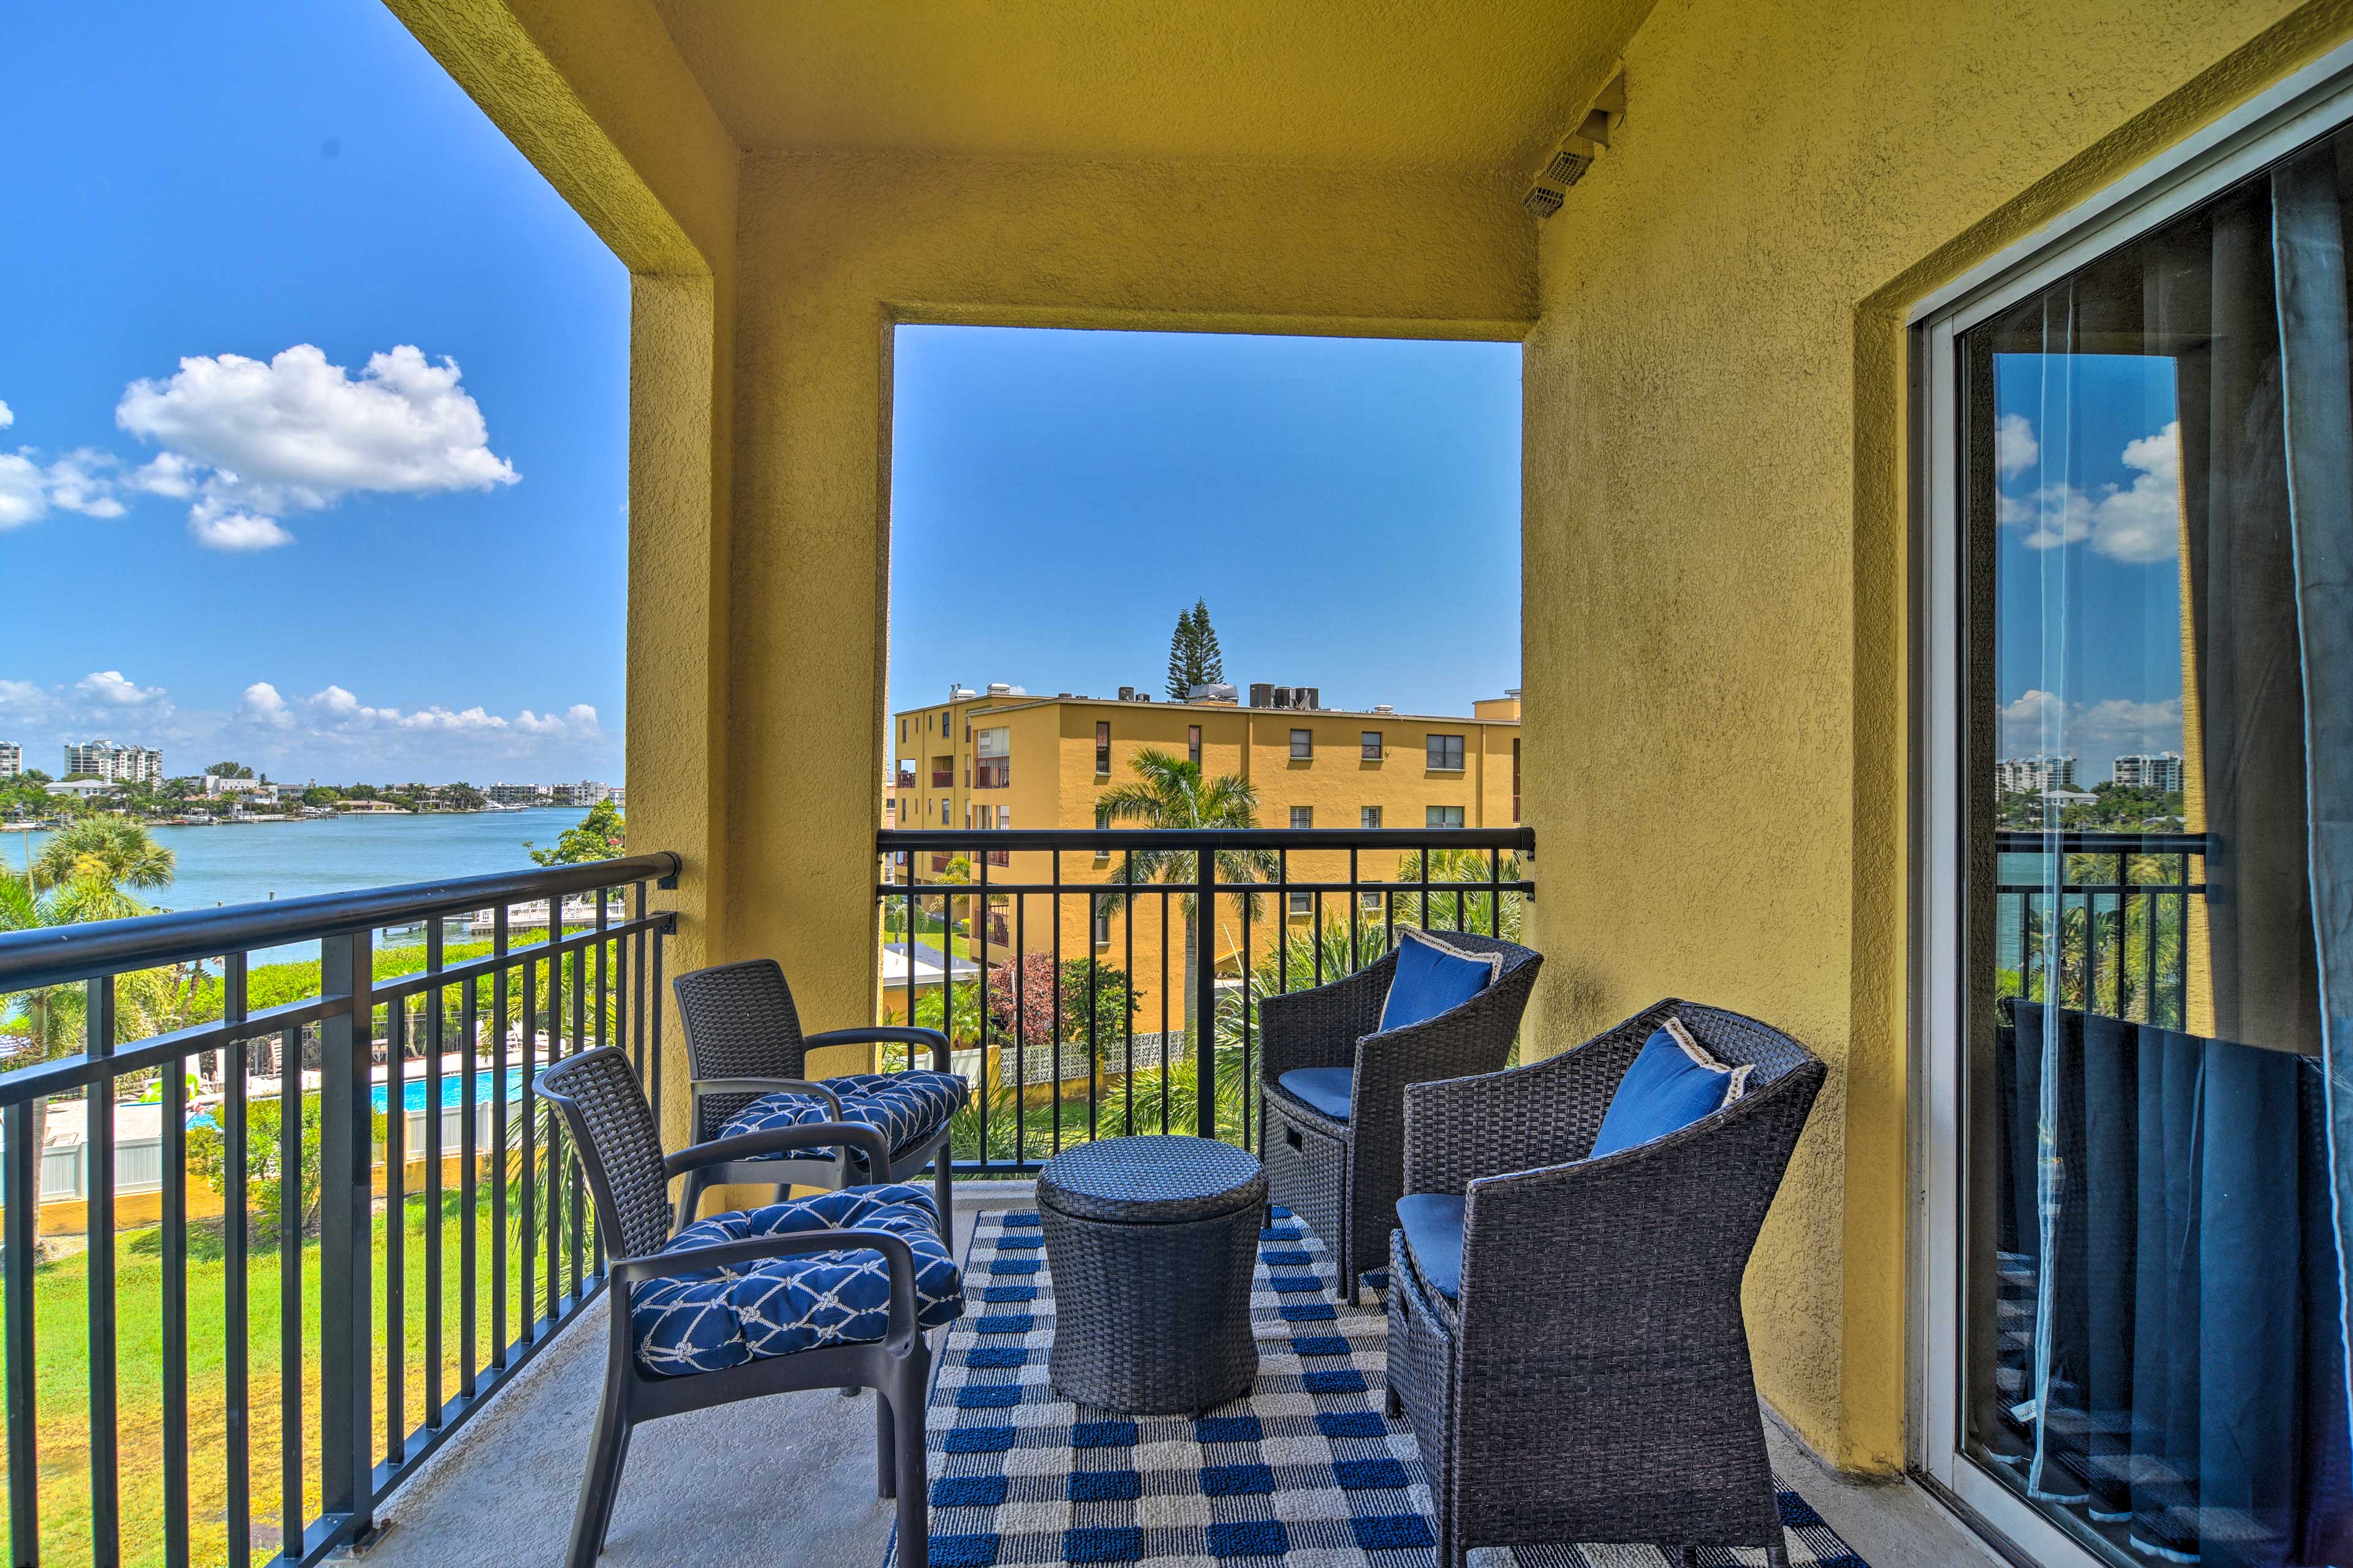 Private Balcony | Outdoor Dining | Patio Furniture